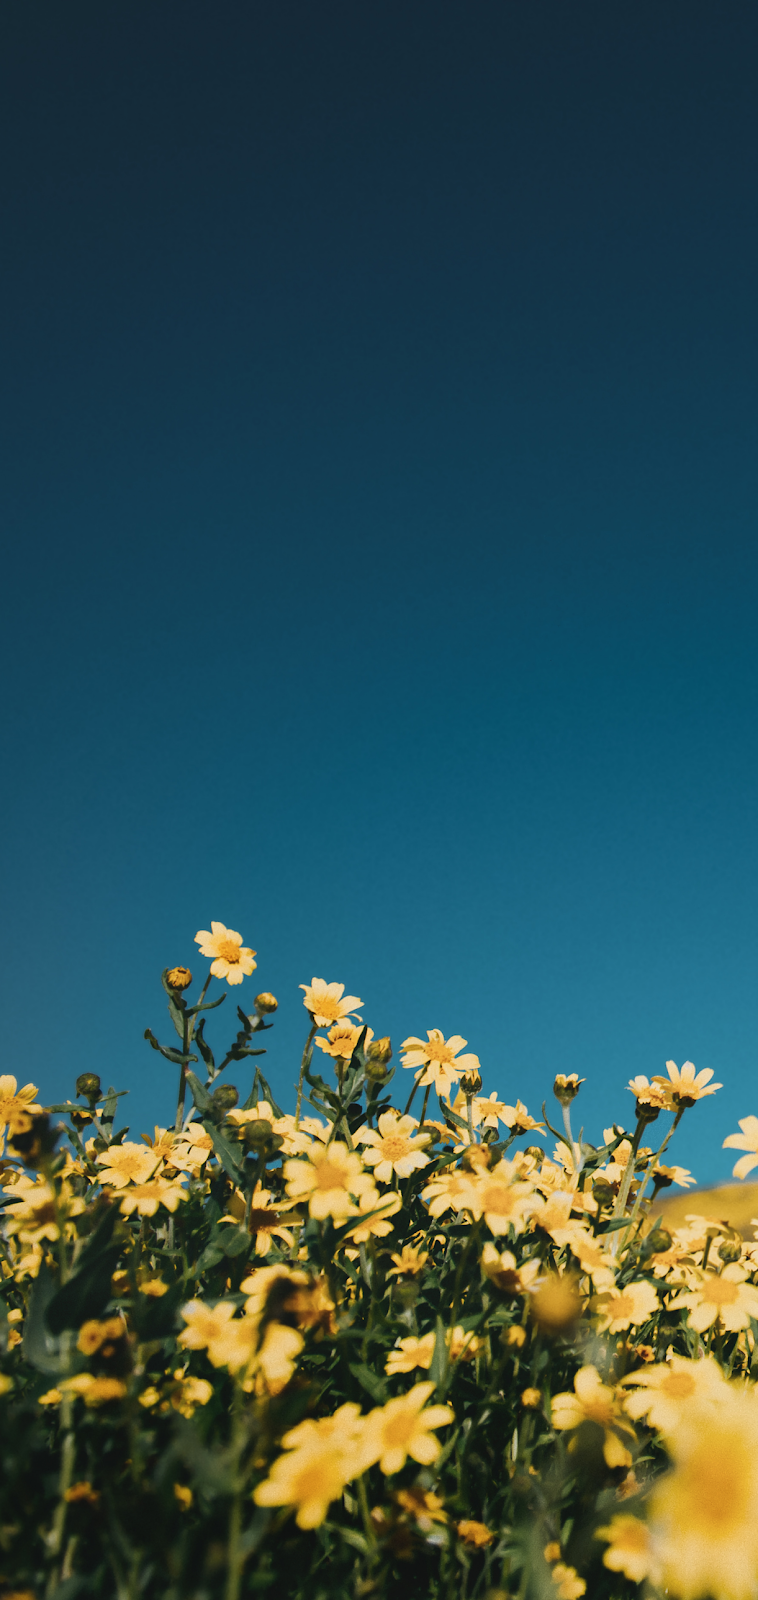 Yellow flowers in the blue sky. Blue sky wallpaper, Yellow flowers, Blue flower wallpaper